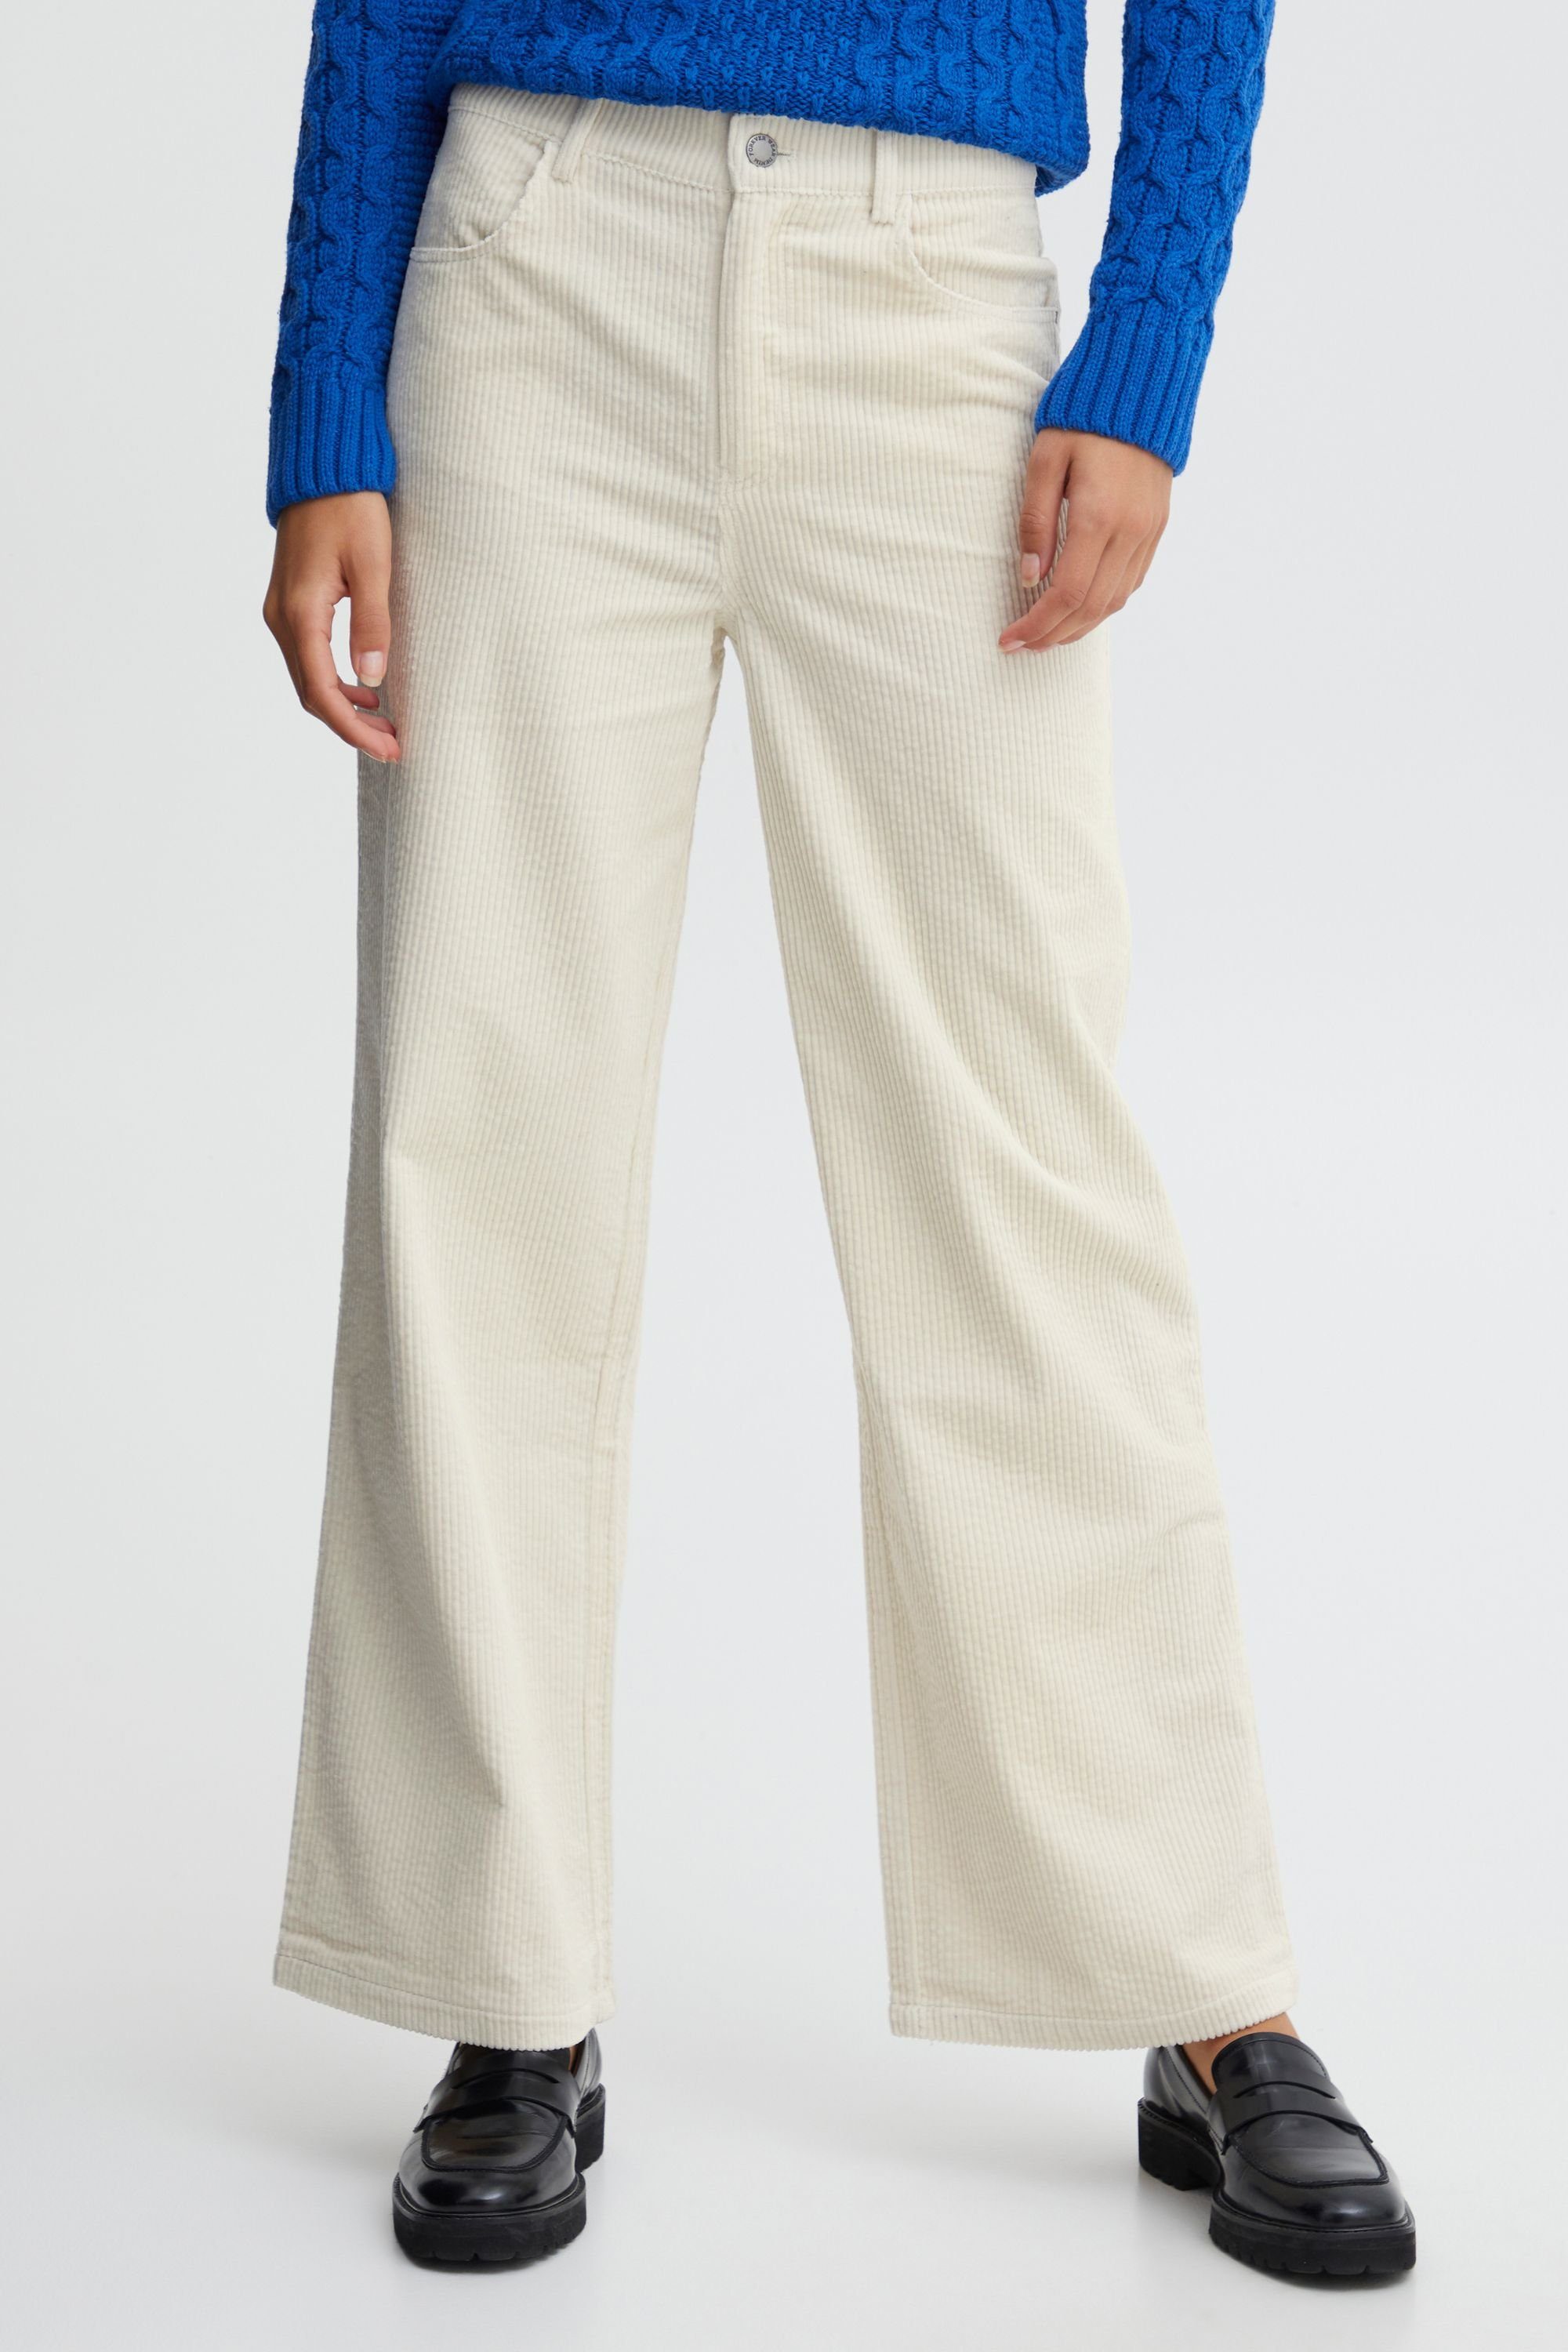 b.young Chinohose BYDANNA - Birch (130905) PANTS